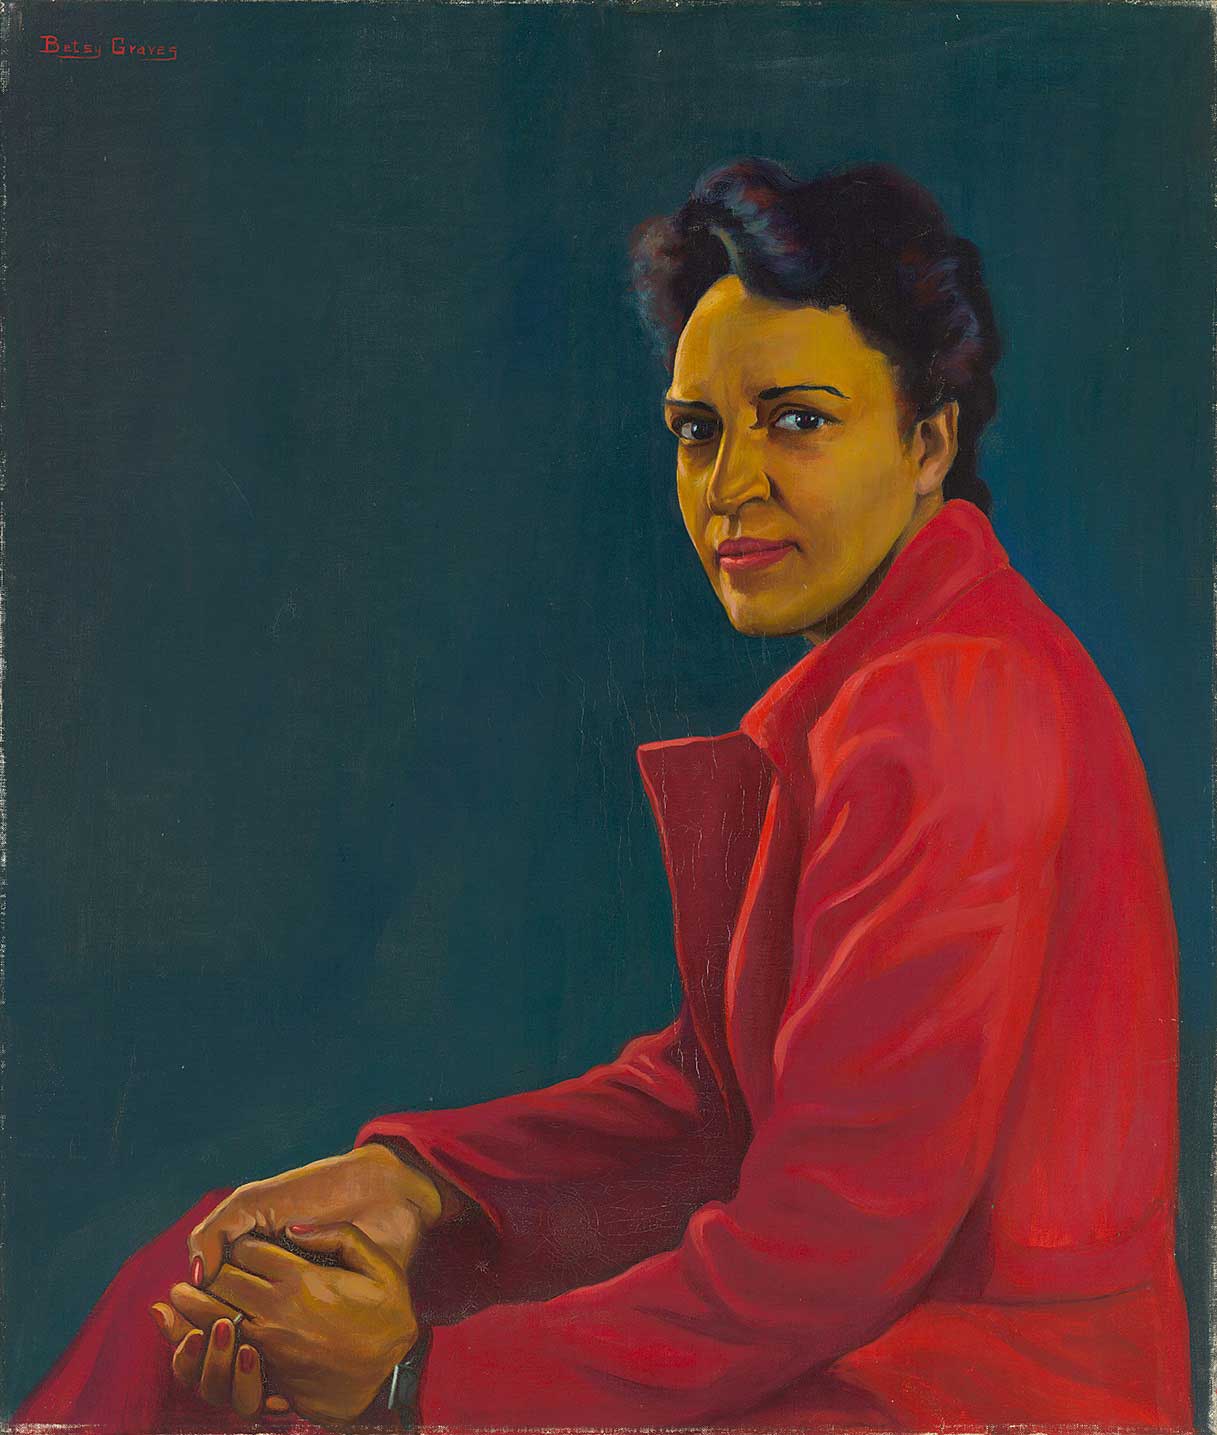 A painting of a seated women in profile and wearing a red dress